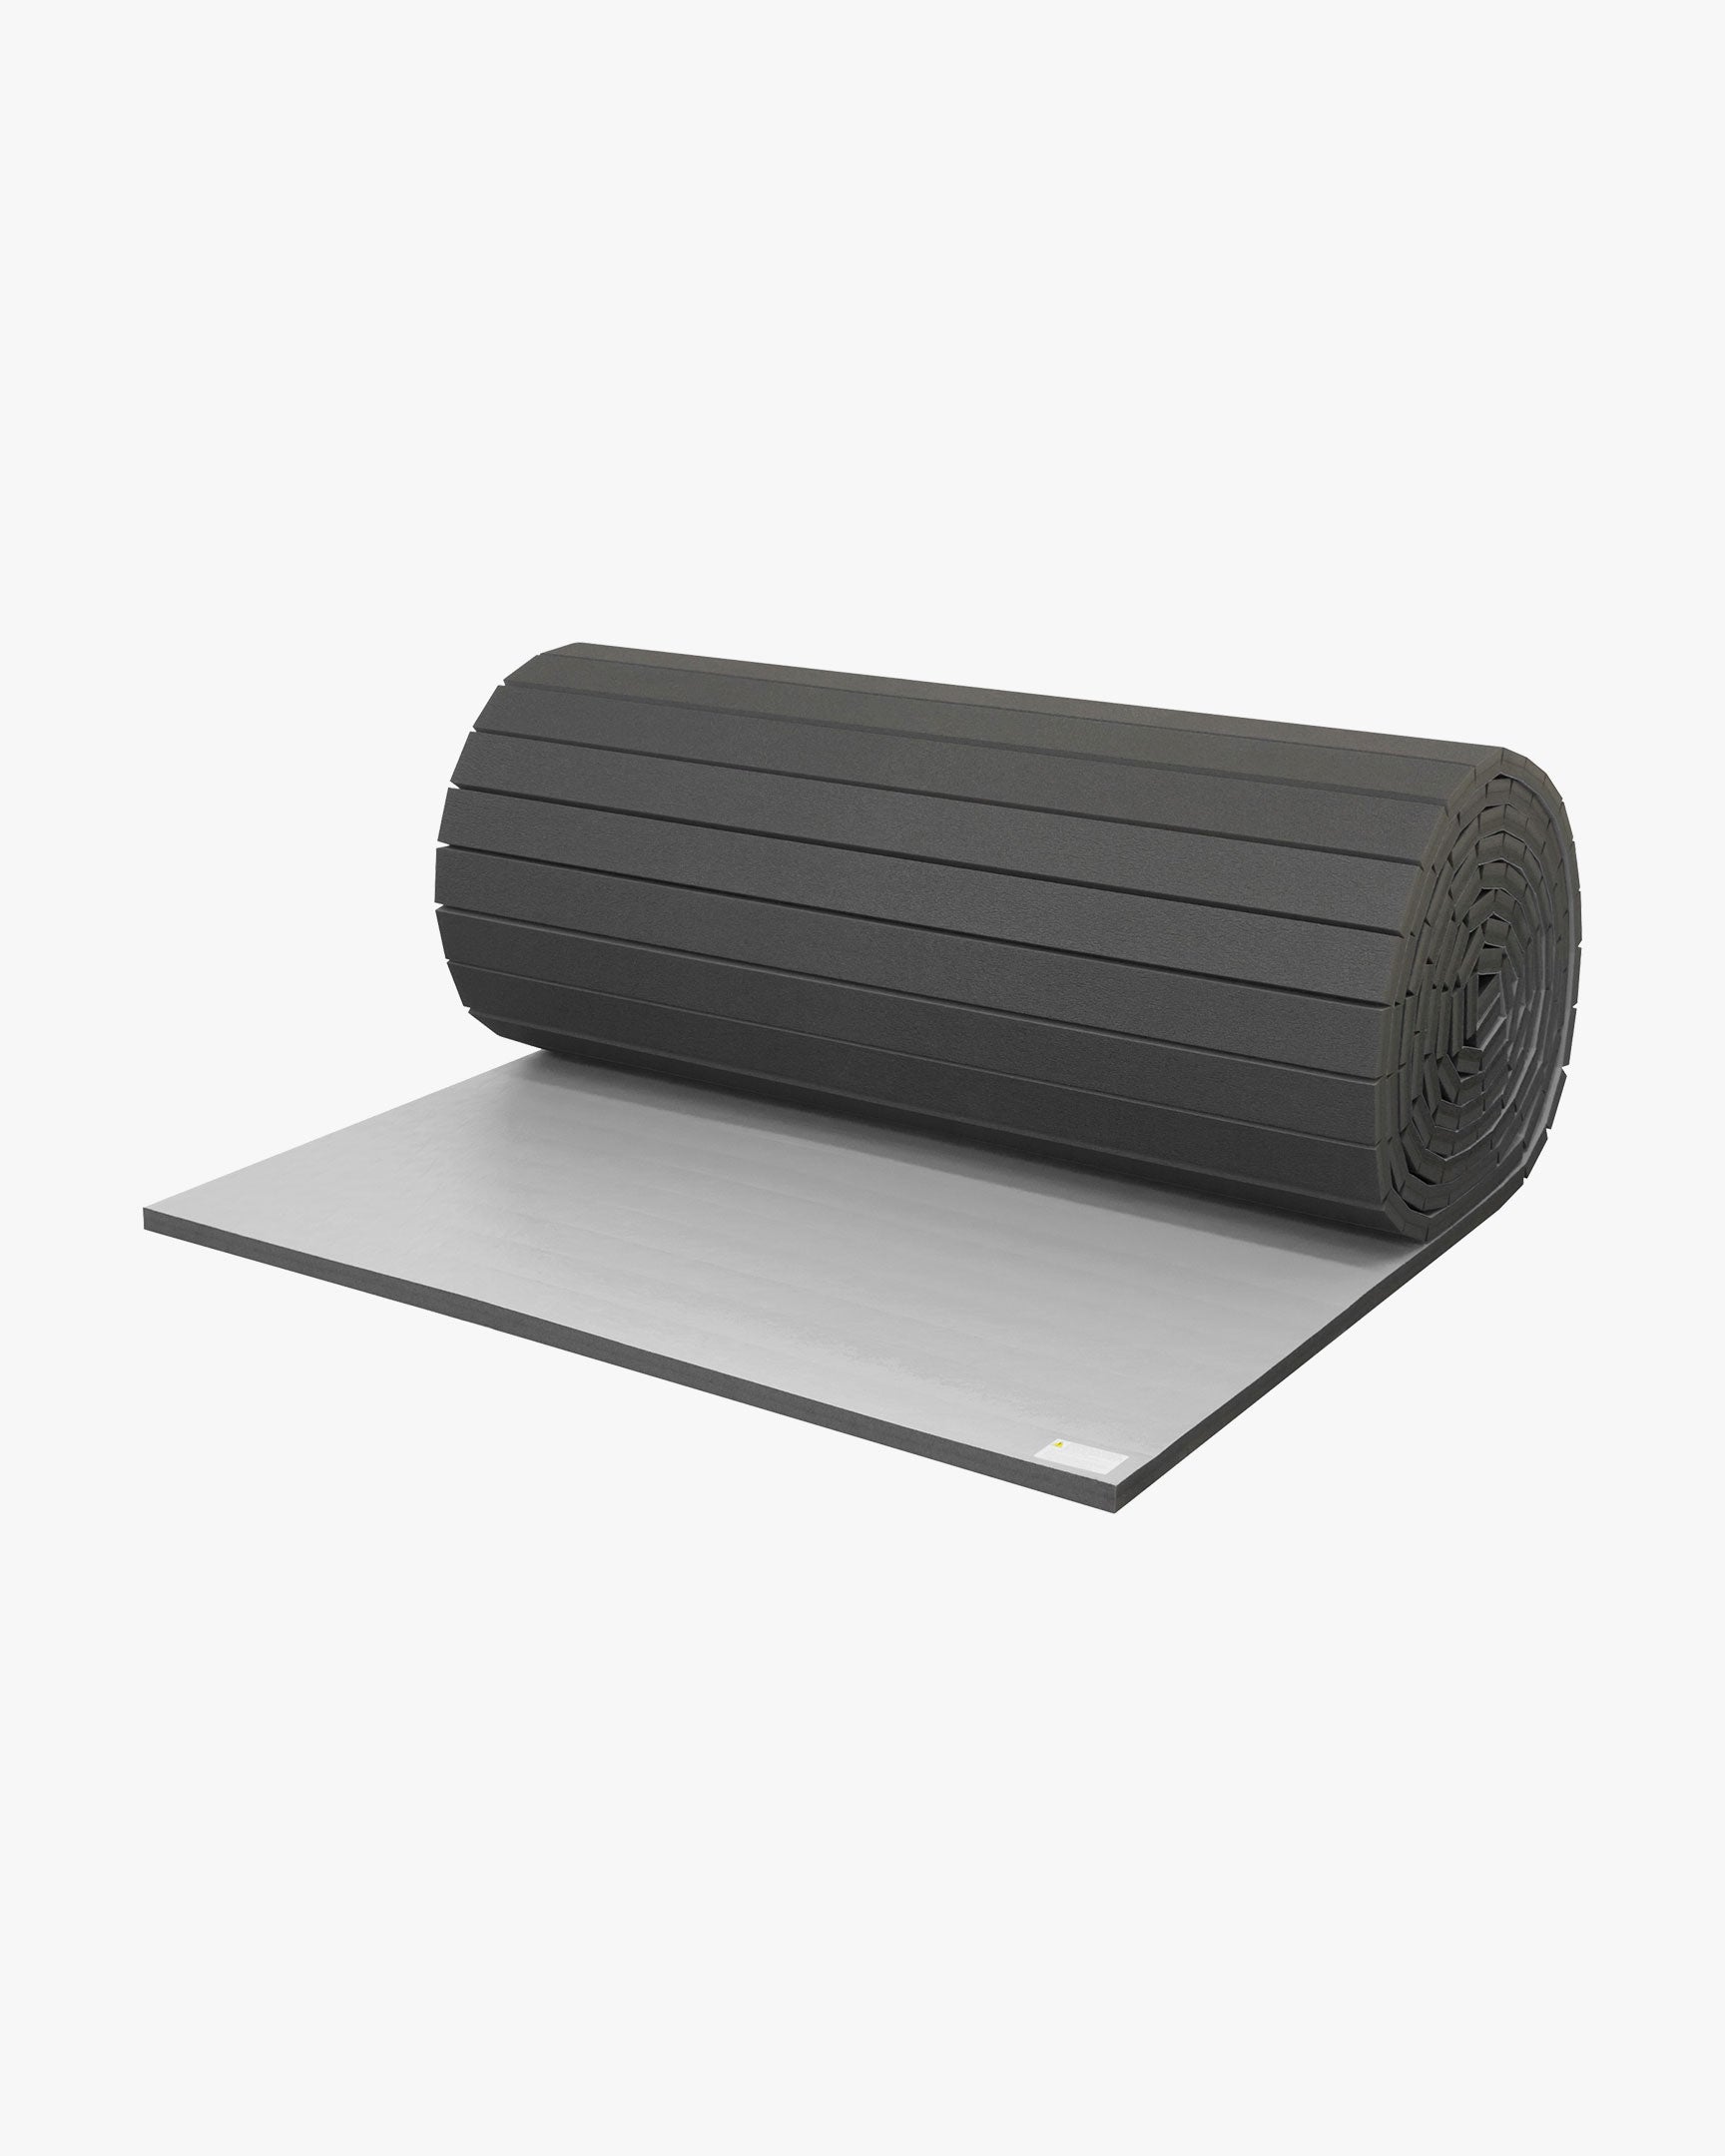 Custom Rollout Mat - 1.25" Thick Charcoal Grey